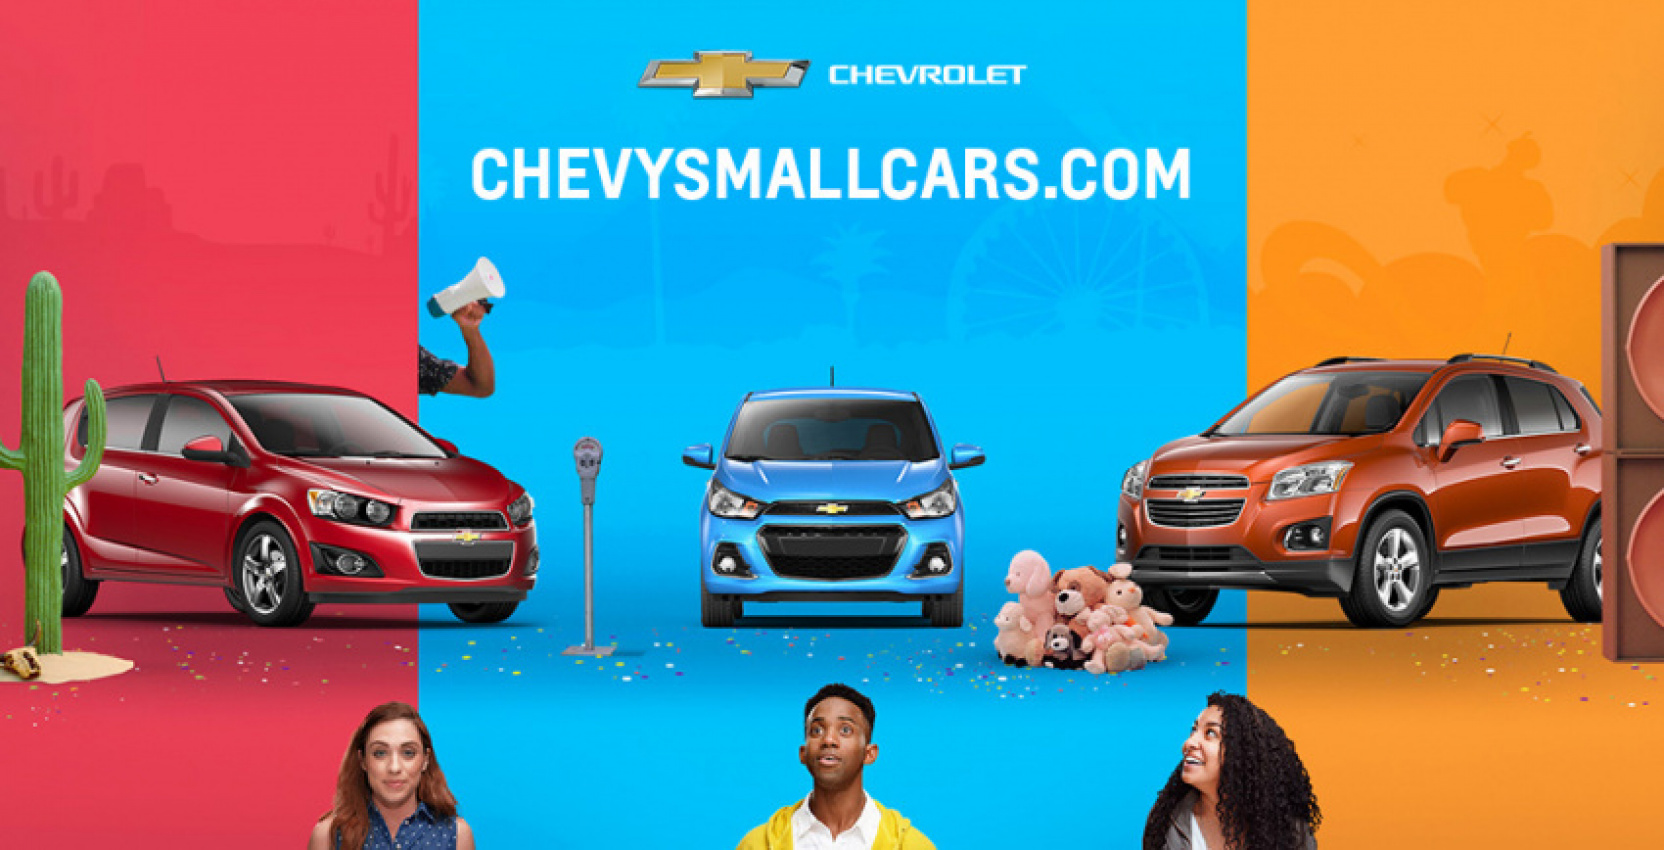 autos, cars, chevrolet, autos chevrolet, chevrolet sets out to woo younger, more socially savvy buyer